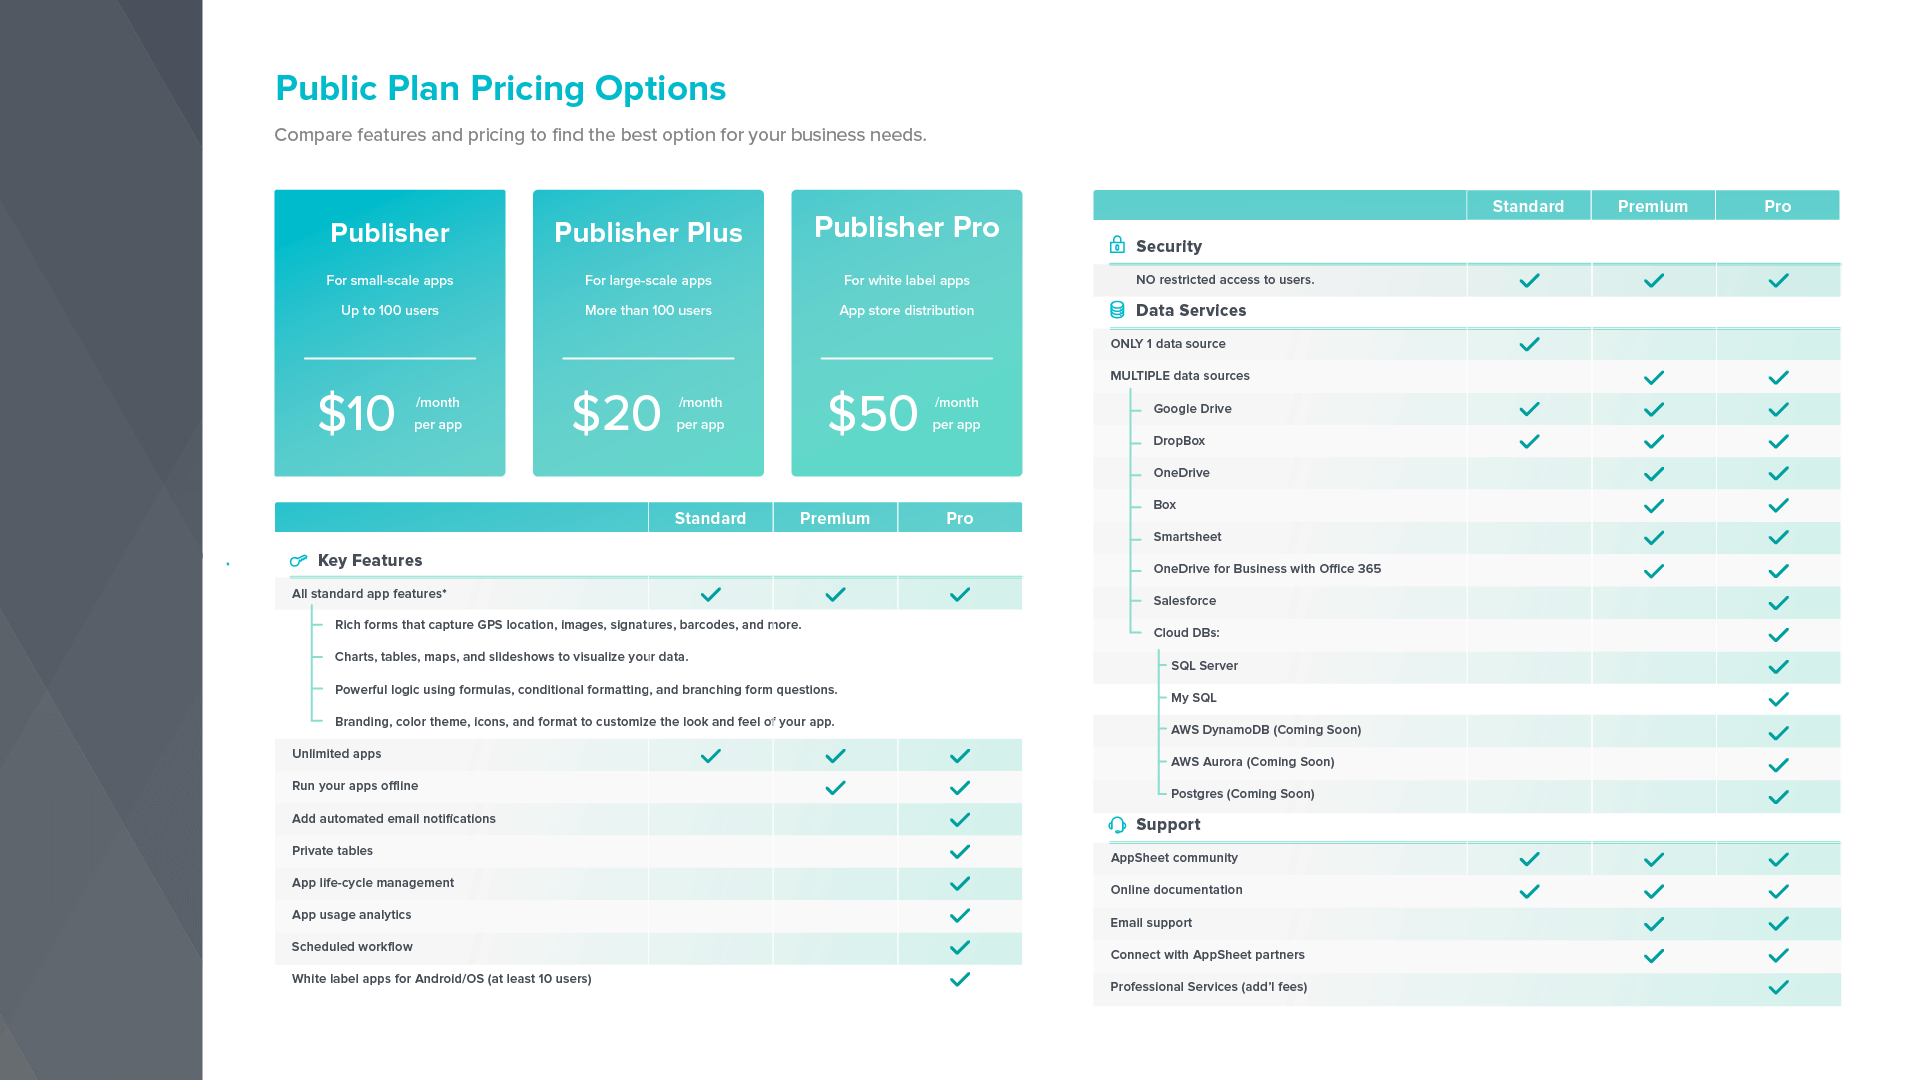 Pricing-Public-01.png